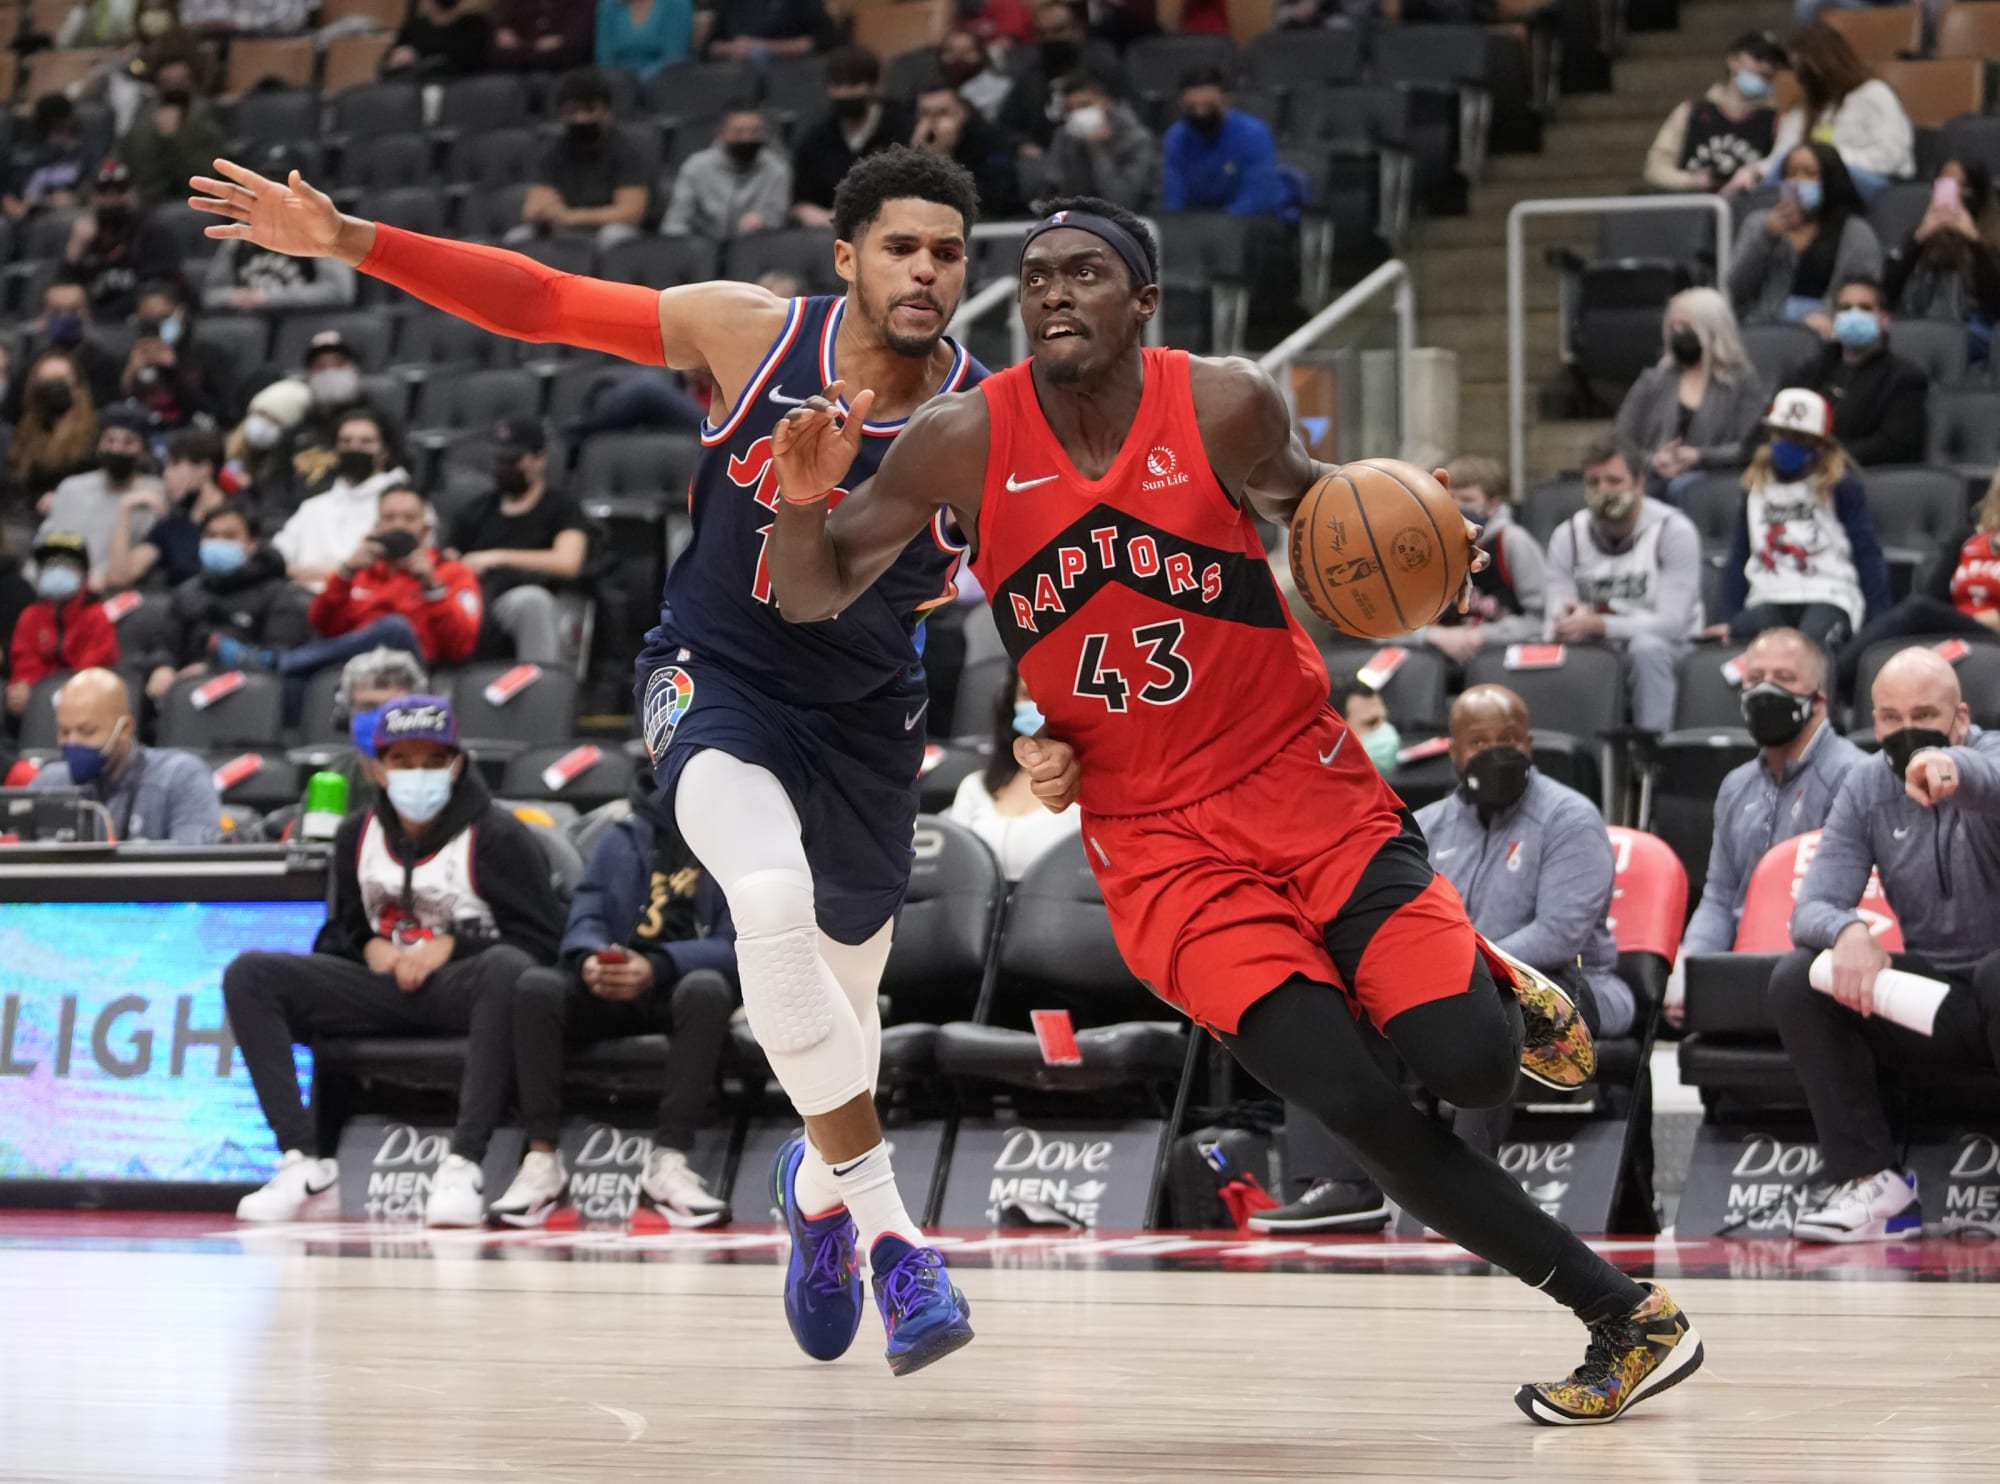 3 advantages Raptors have over 76ers in potential playoff matchup